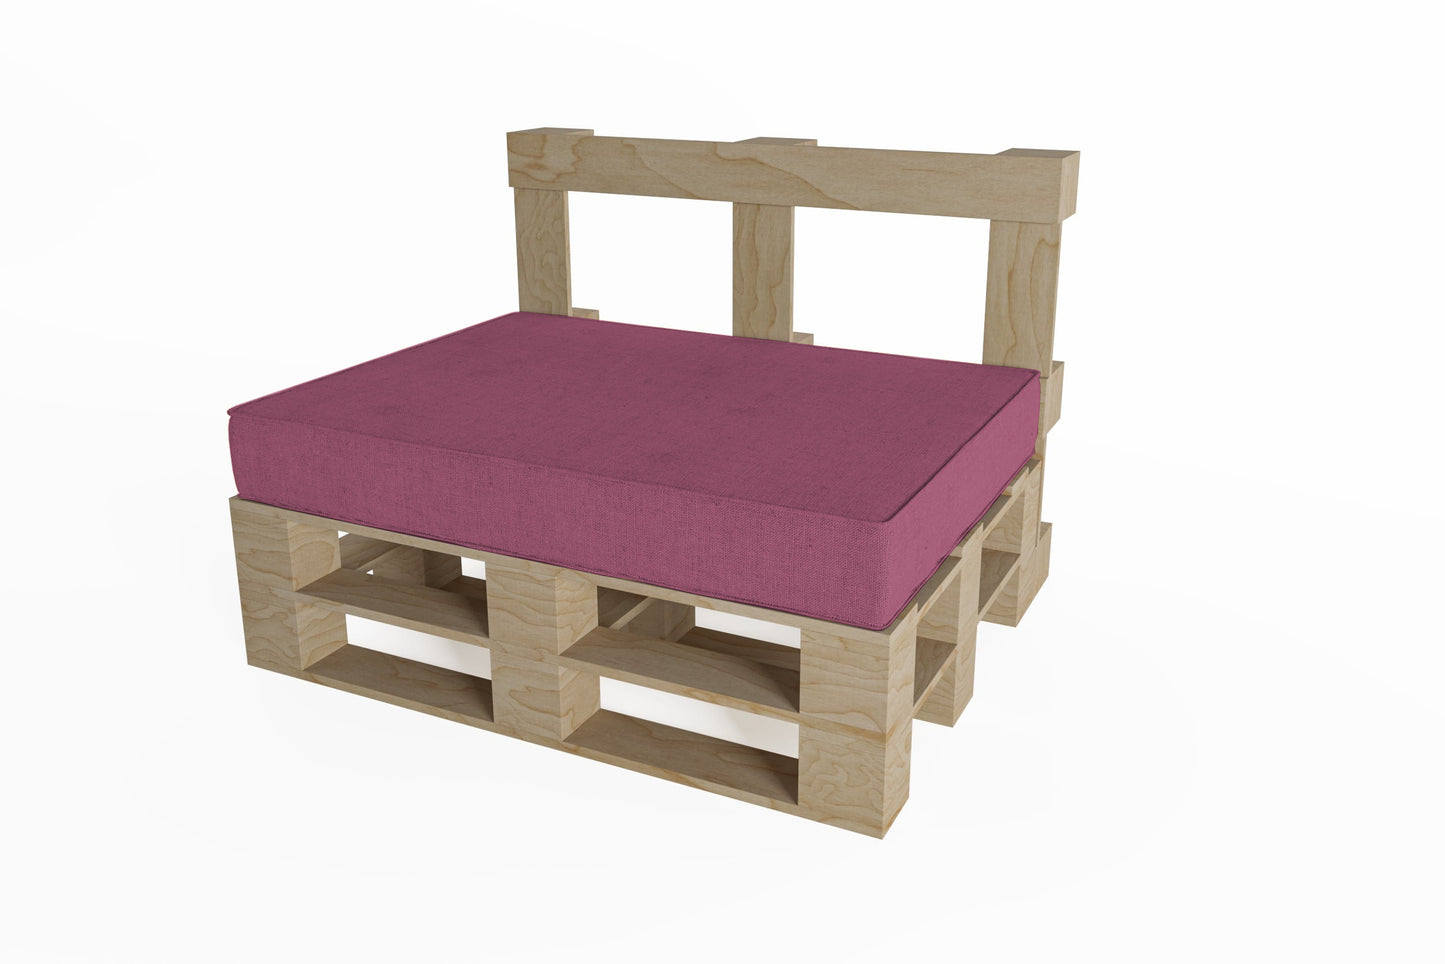 Pallet cushion, pallet pad, piping, seam, pallet cushion, seat cushion, backrest, cold foam, foam flakes, filling, many sizes and colours